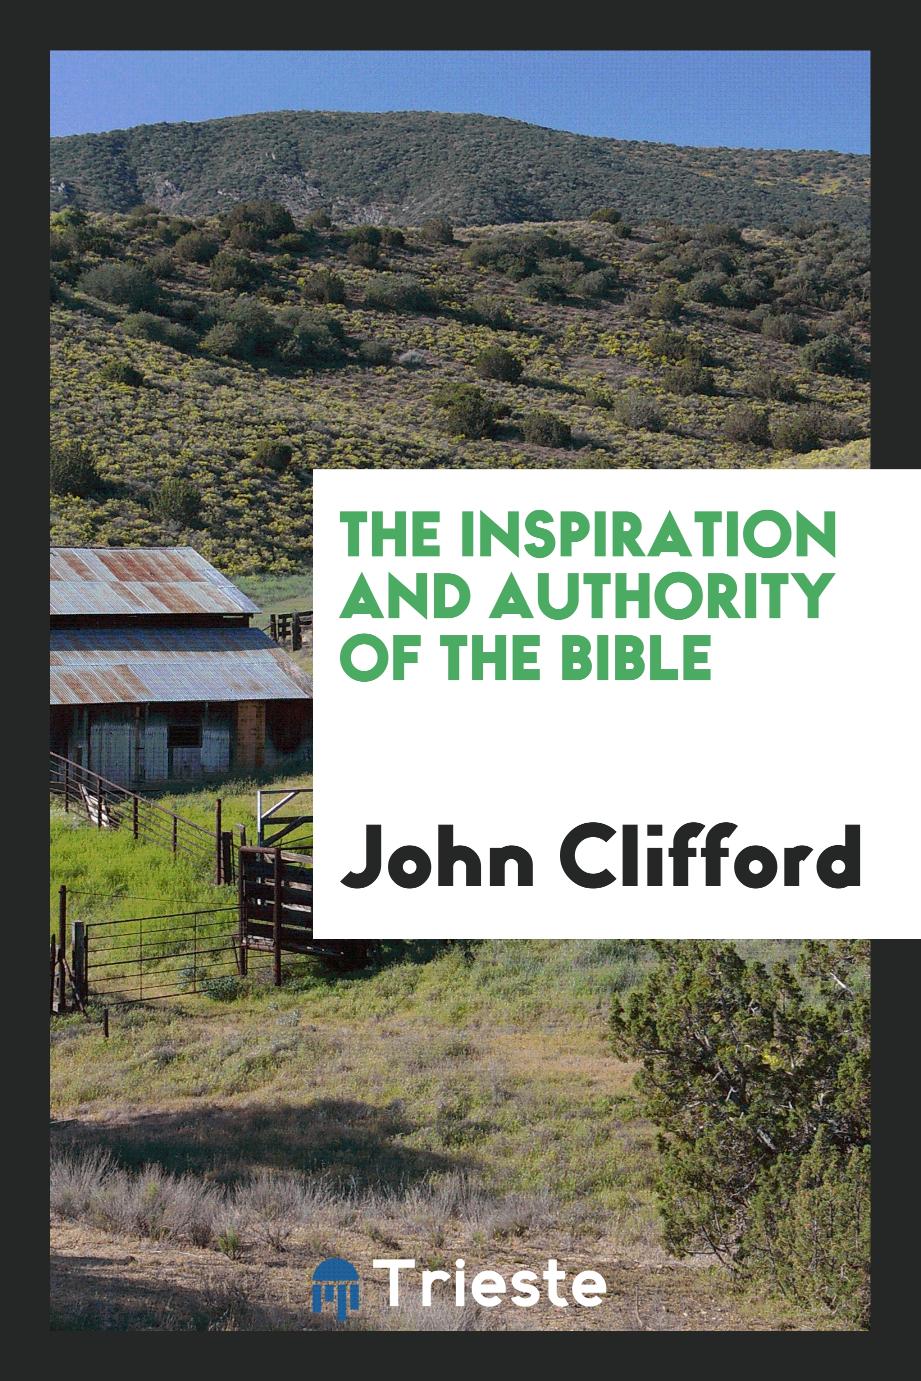 The inspiration and authority of the Bible